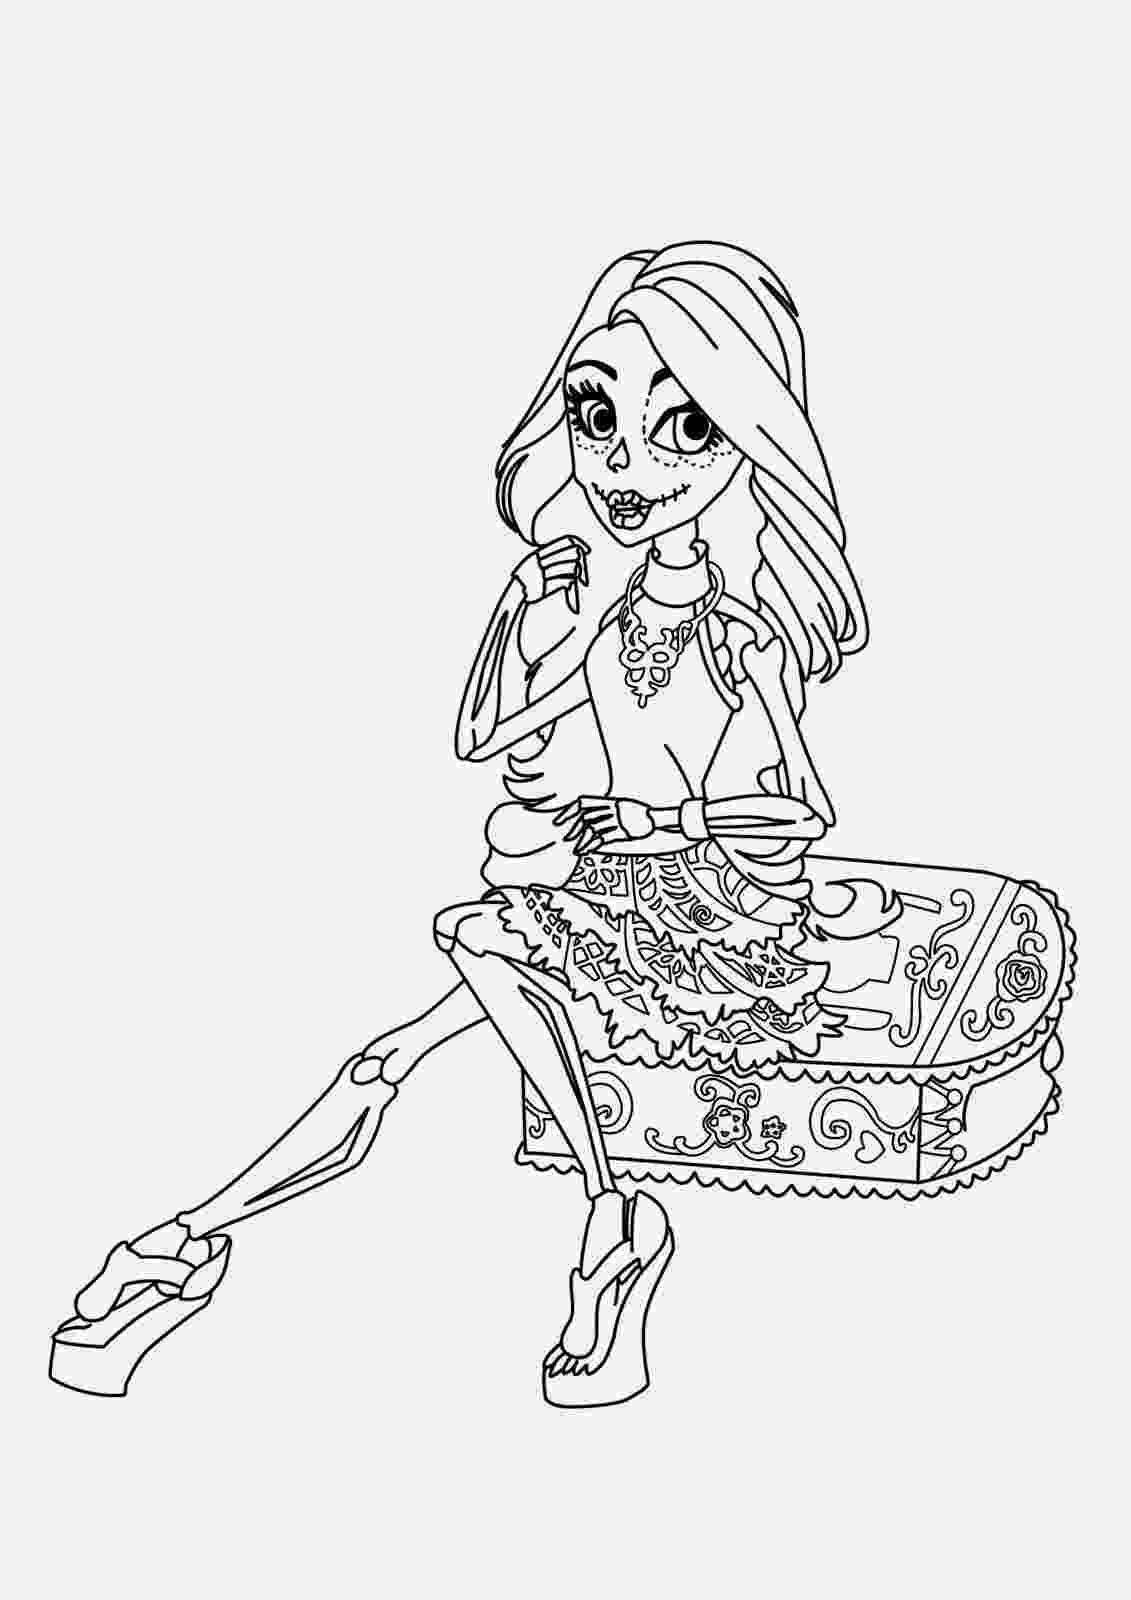 monster high free colouring pages coloring pages monster high coloring pages free and printable pages colouring monster free high 